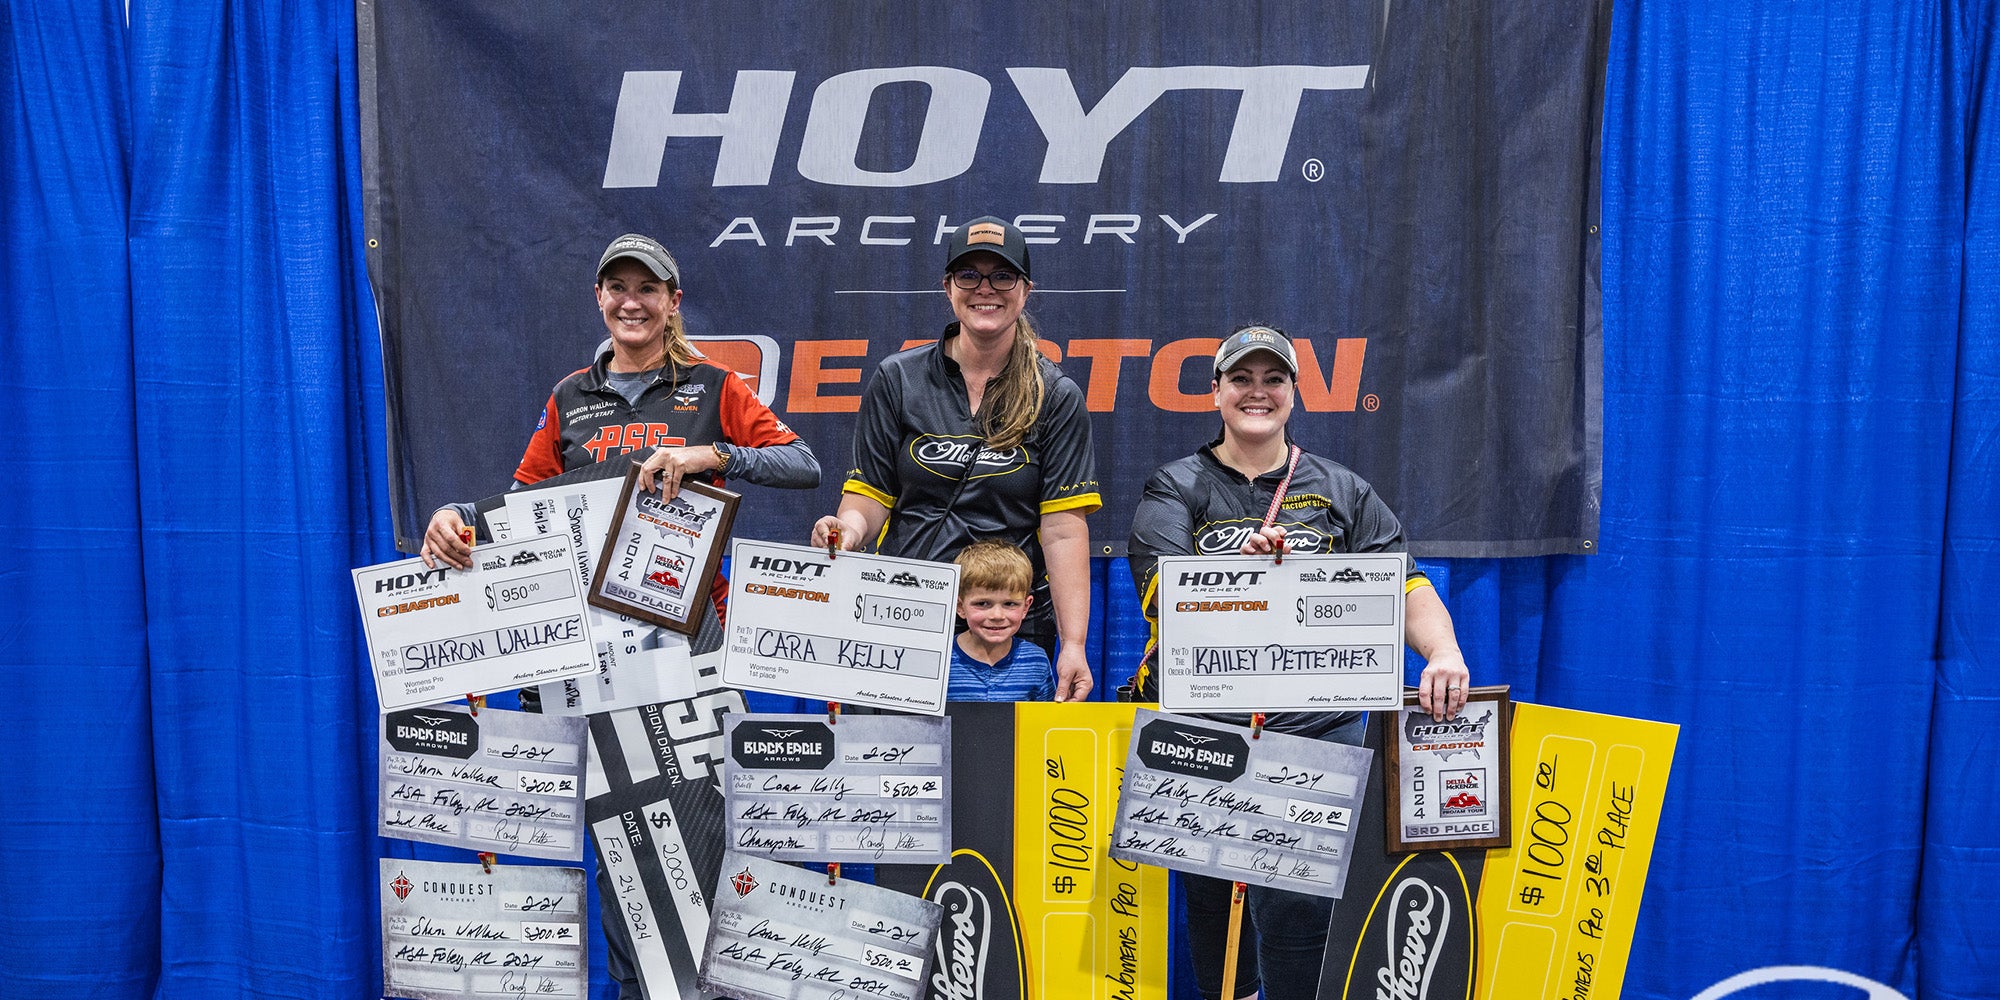 Team TAC Hits the Mark in Foley